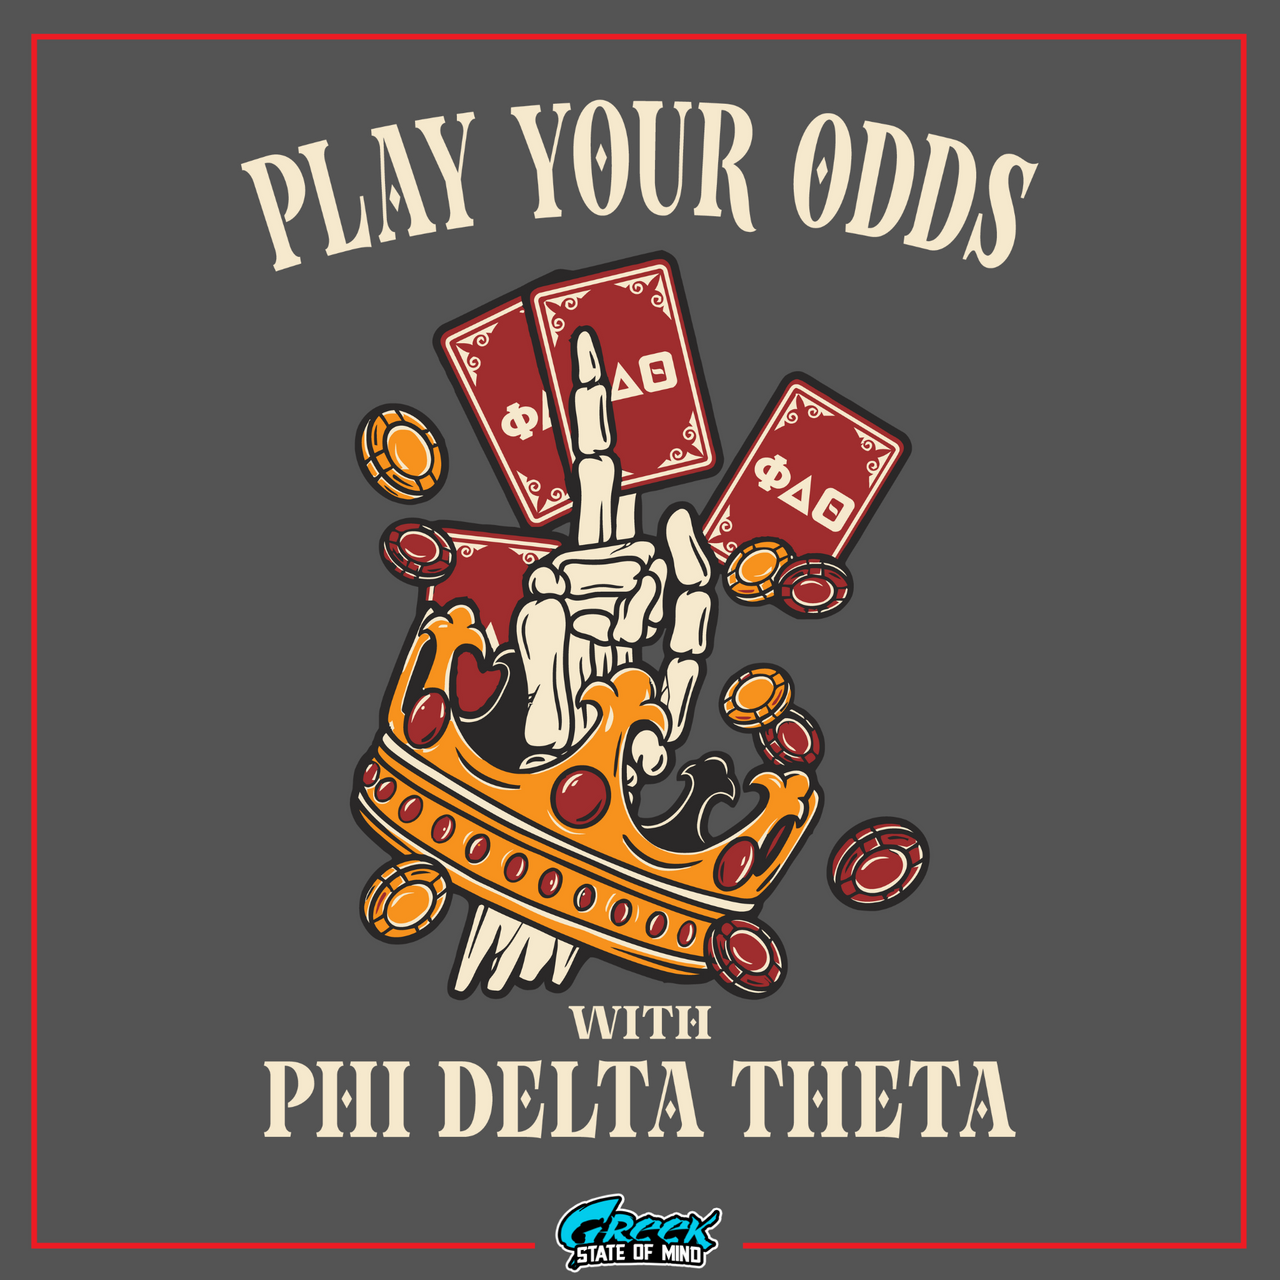 Phi Delta Theta Graphic Hoodie | Play Your Odds | phi delta theta fraternity greek apparel design